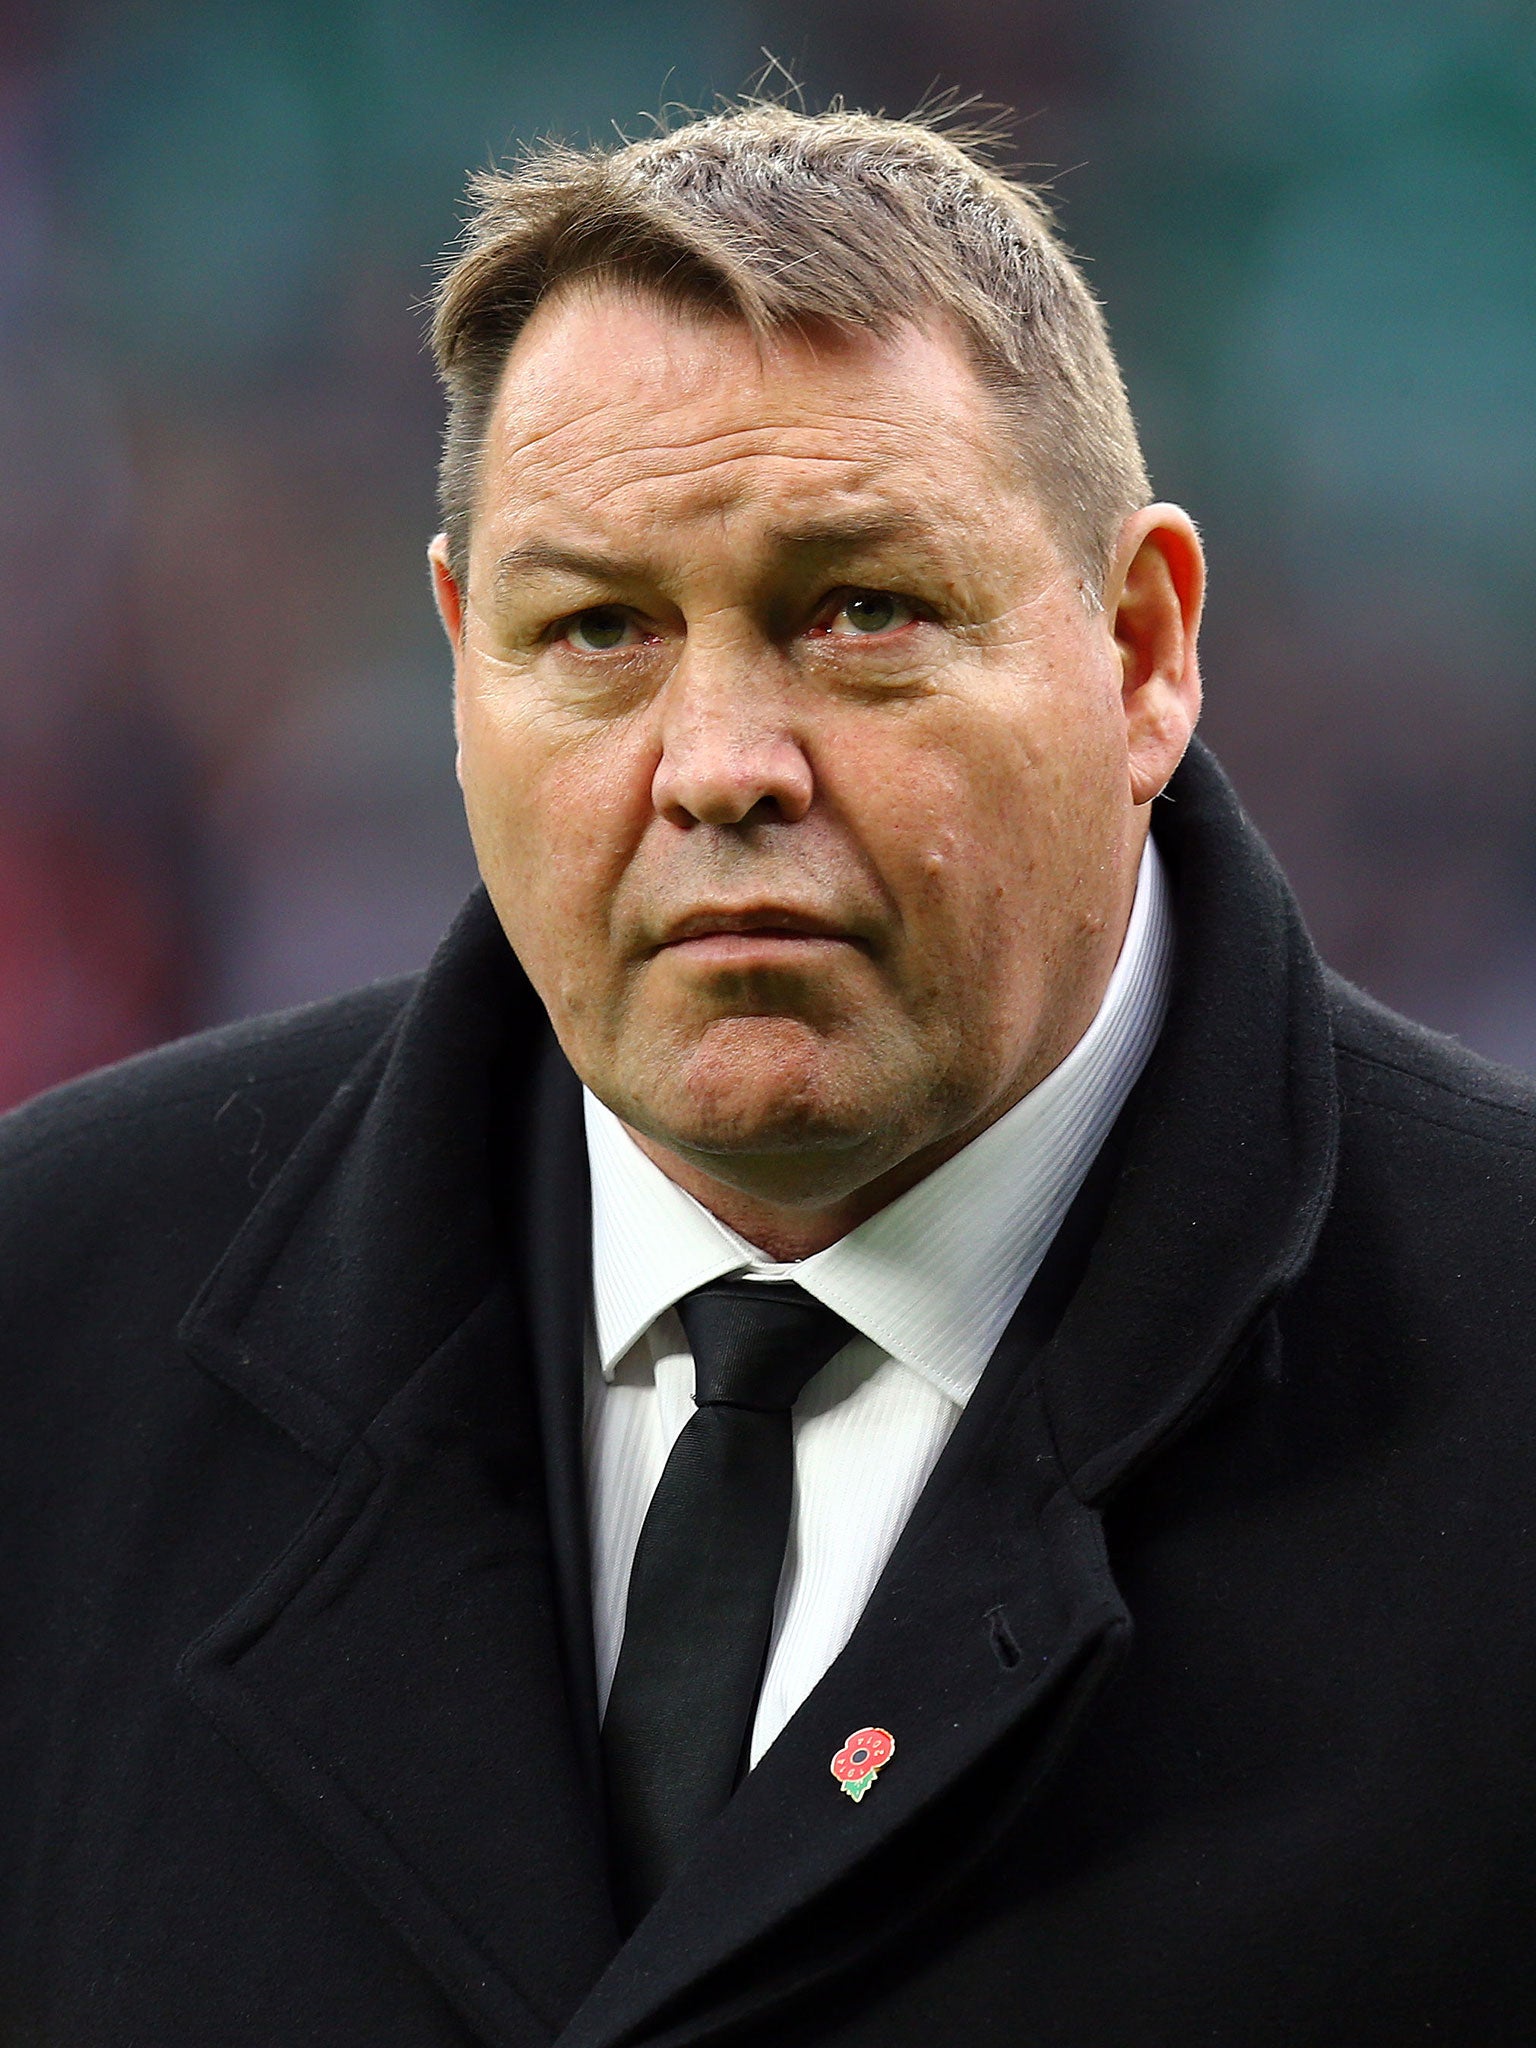 New Zealand coach Steve Hansen believes there are too many referrals to video officials